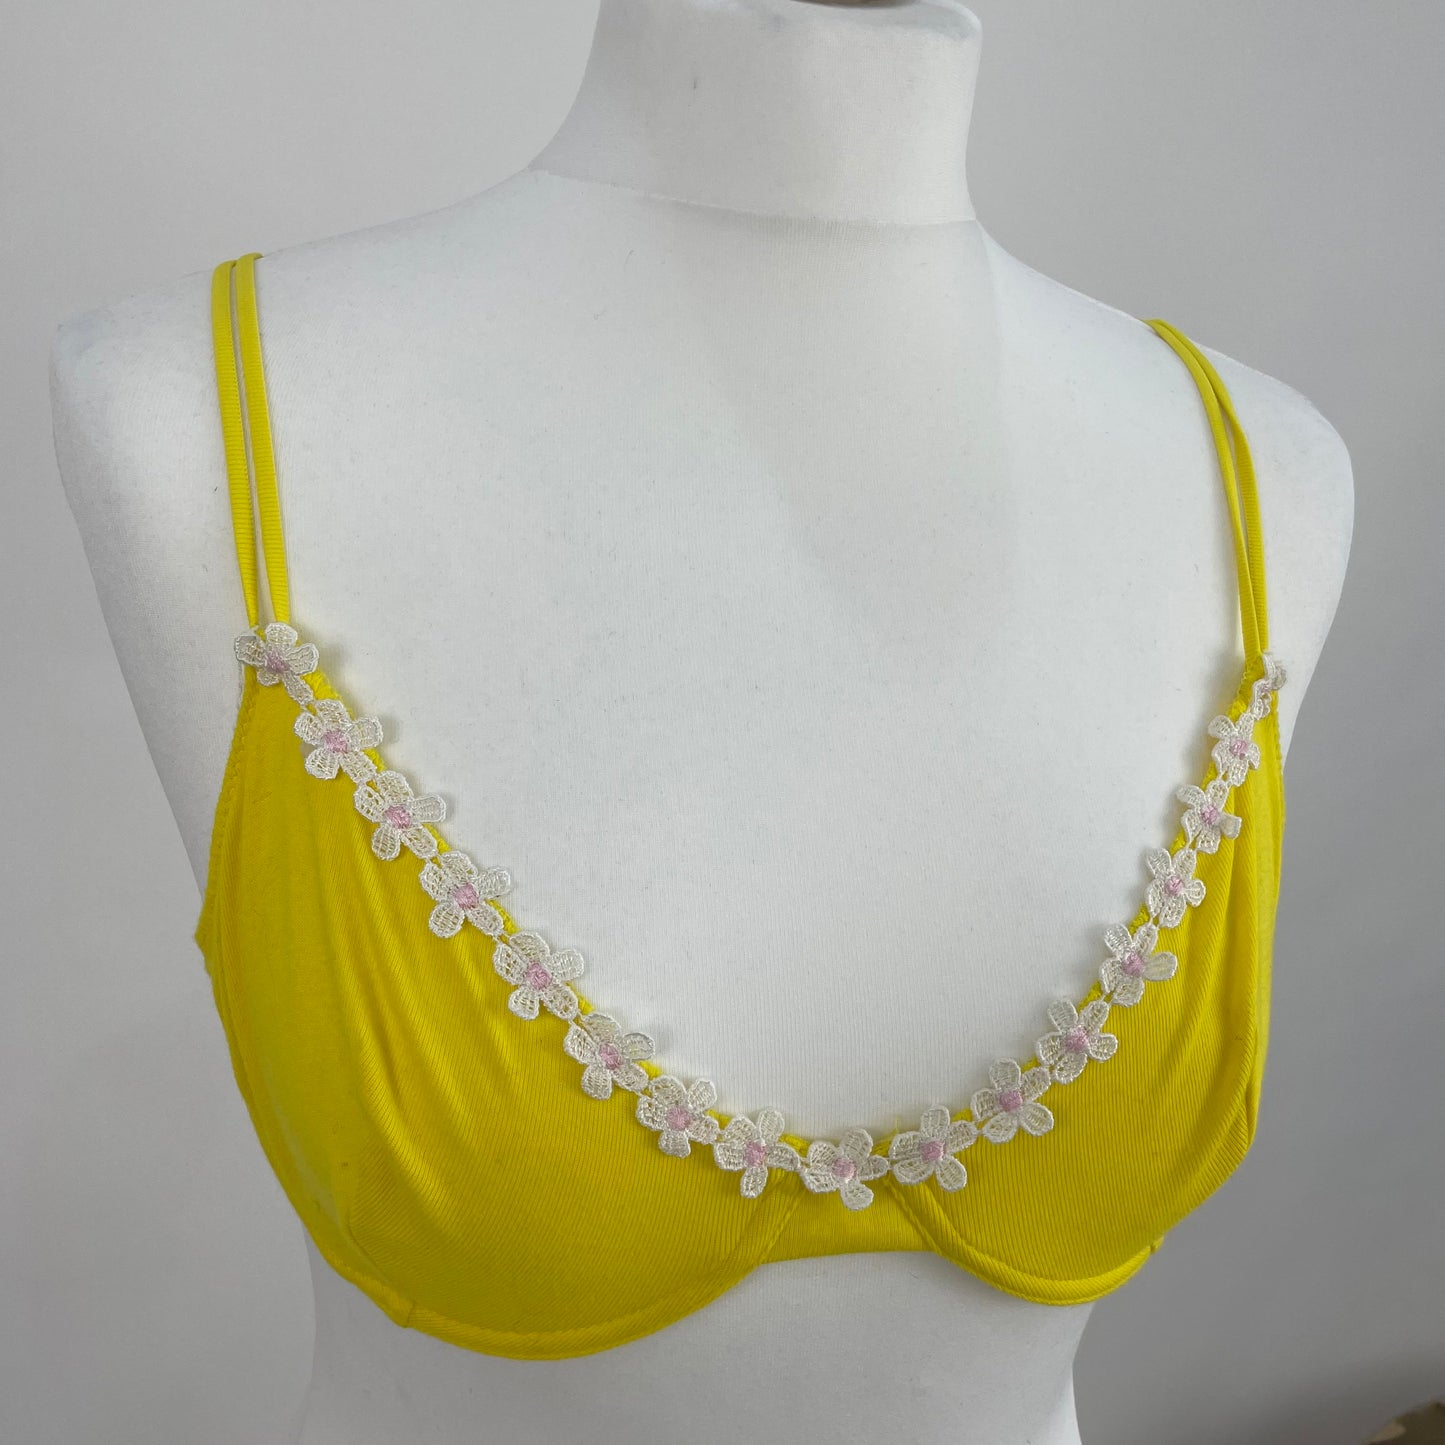 VINTAGE GEMS DROP | small yellow bra with floral daisy detail